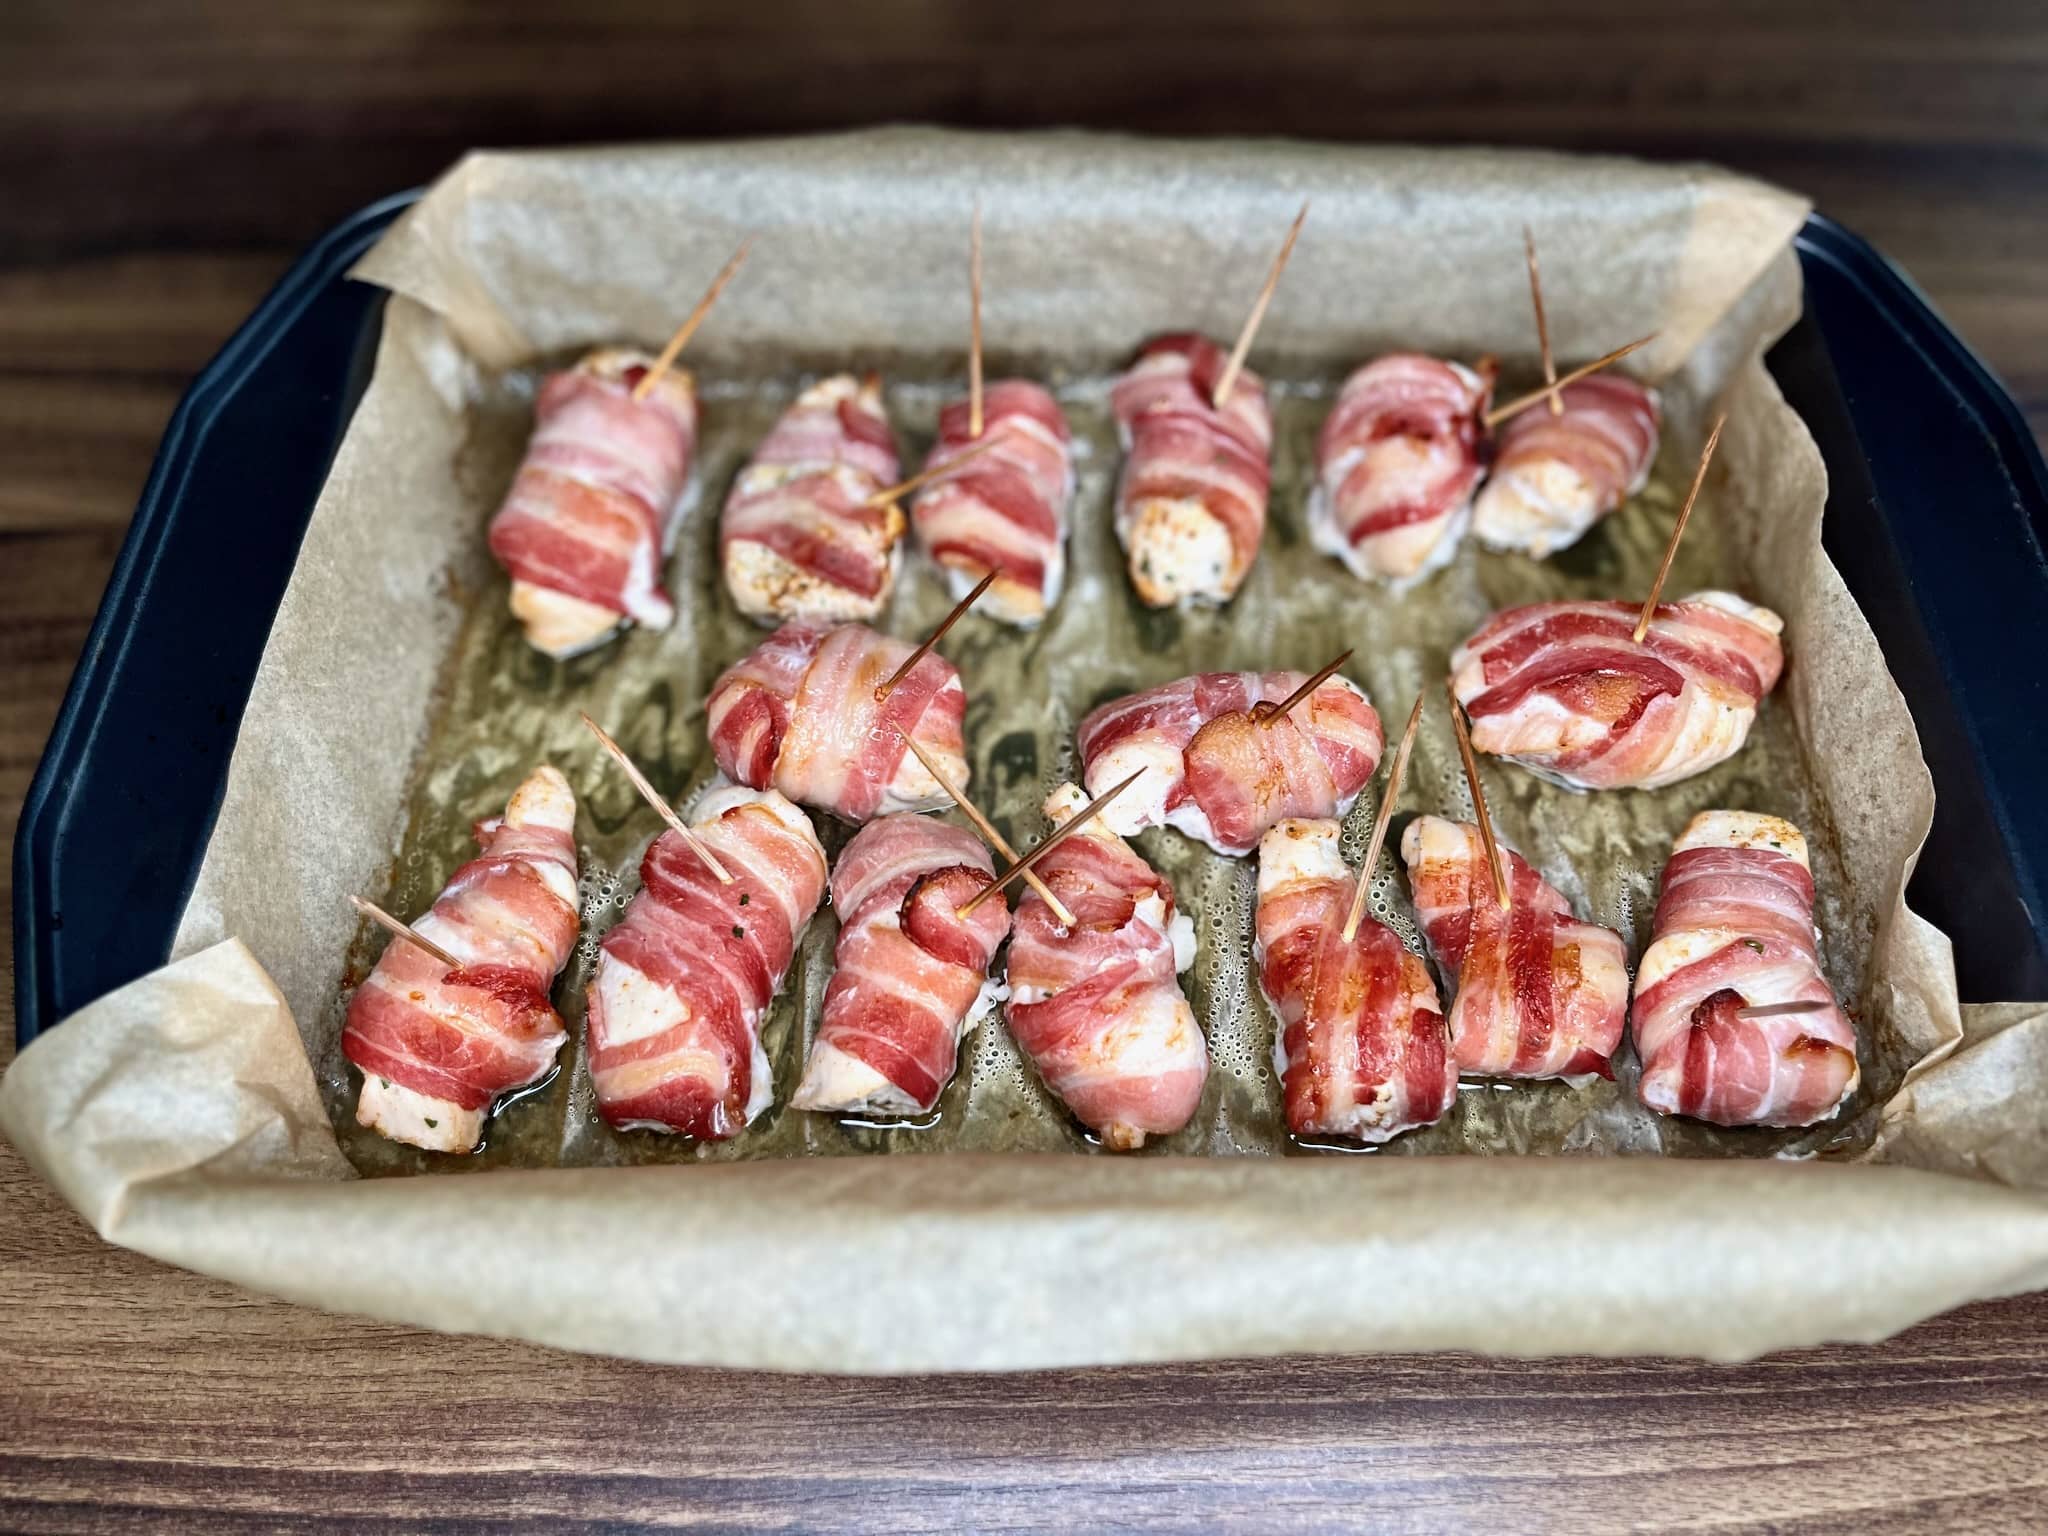 Golden-brown Bacon-Wrapped Chicken Bites emerge from the oven, their crispy bacon exterior yielding to juicy, tender chicken within